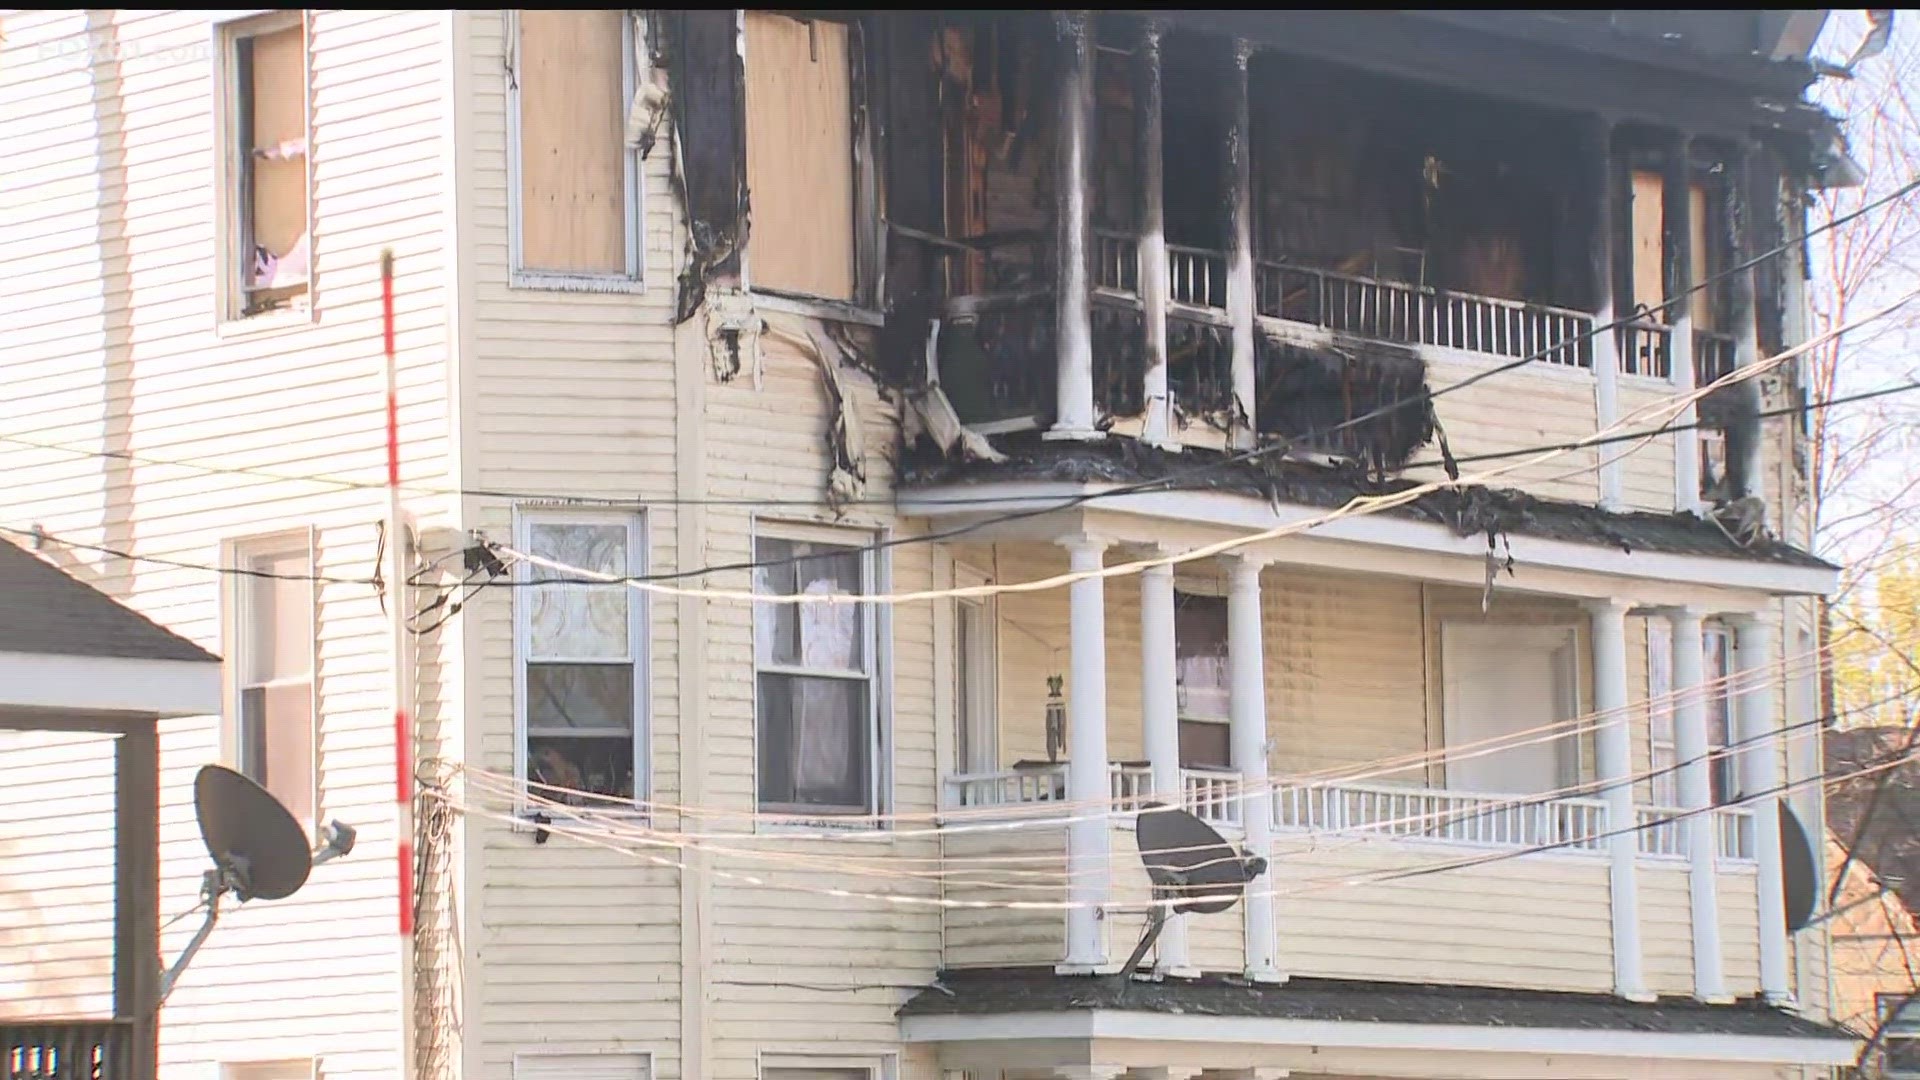 The fire broke out on the third flood of the multi-family home and was escalated to a 2-alarm blaze by fire crews.